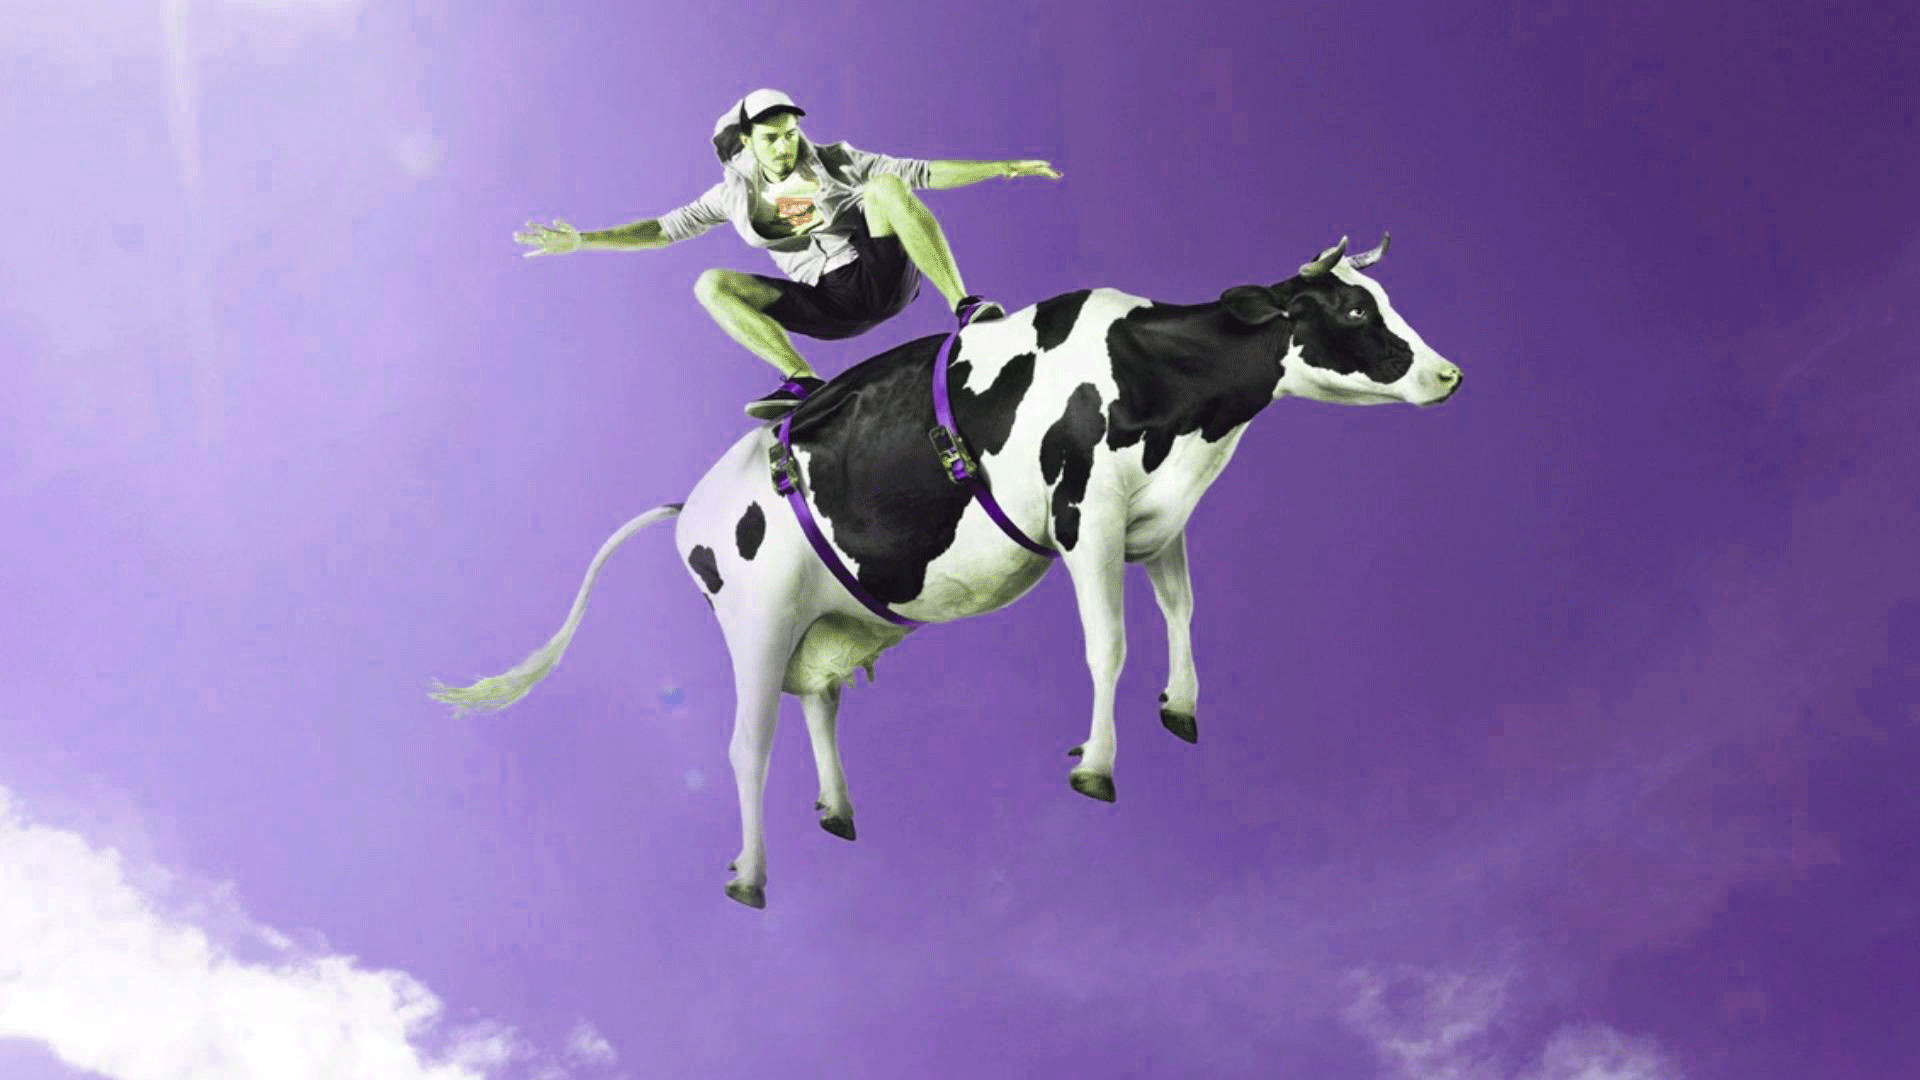 Funny Wallpaper Pictures Images Photo Hd Download 
 - Flying Cows In India - HD Wallpaper 